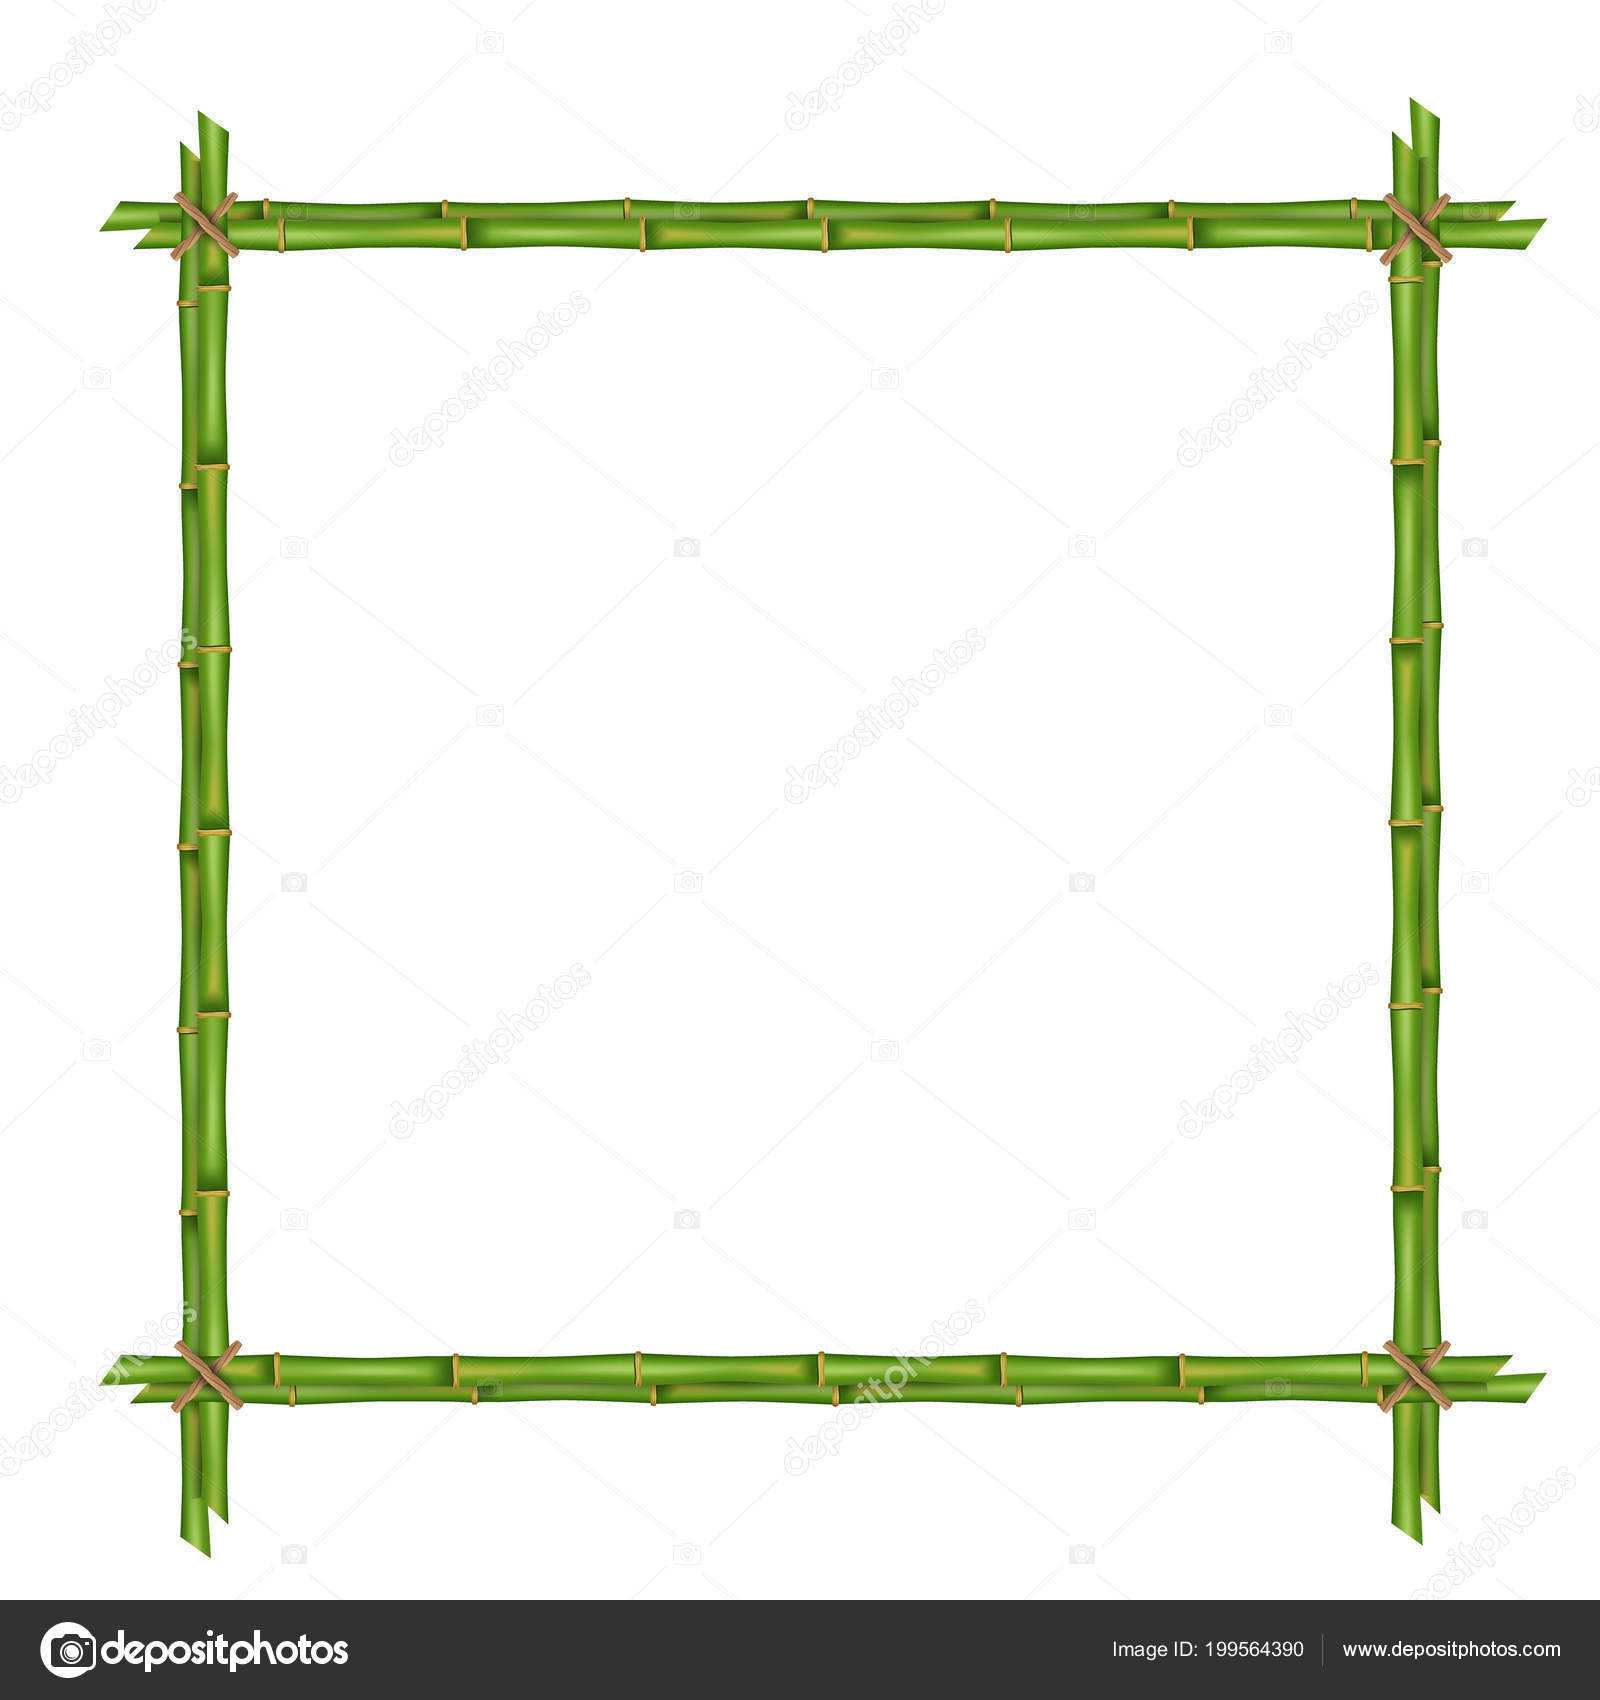 Creative Vector Illustration Bamboo Stems Frame Isolated With Blank Stem And Leaf Plot Template